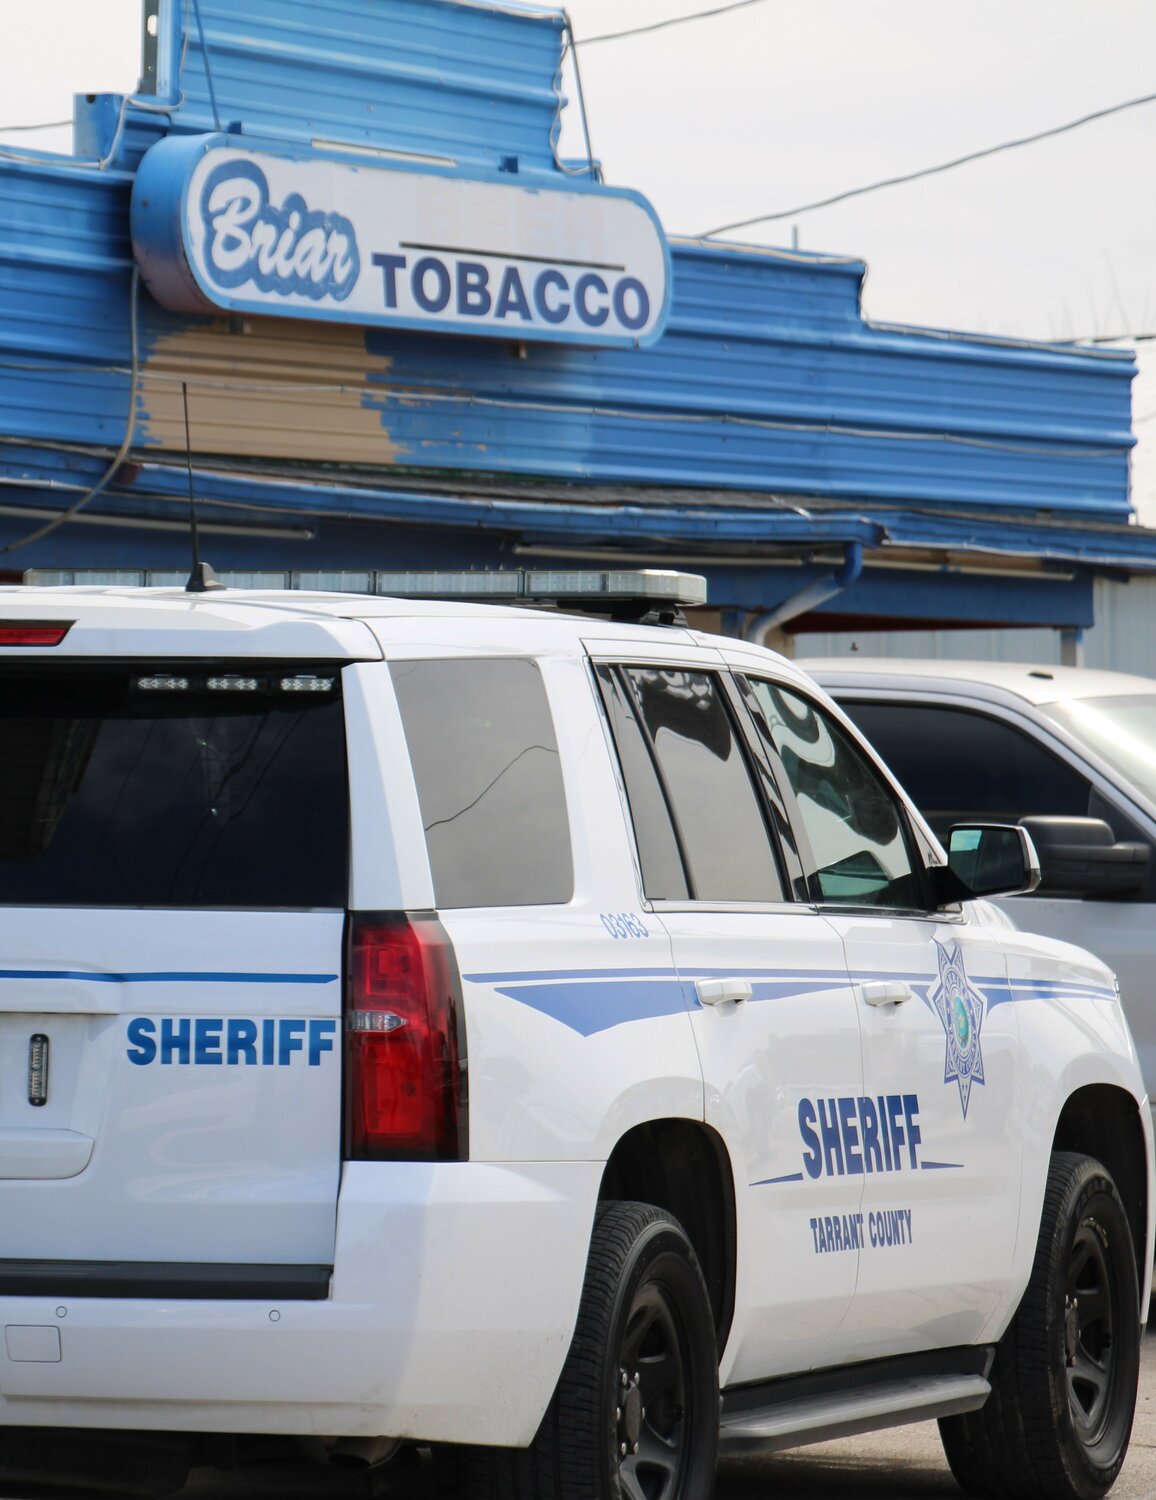 Tarrant County Sheriff's Office deputies executed a search warrant at Briar Beer & Tobacco related to gambling allegations on the afternoon of Thursday, Feb. 8.